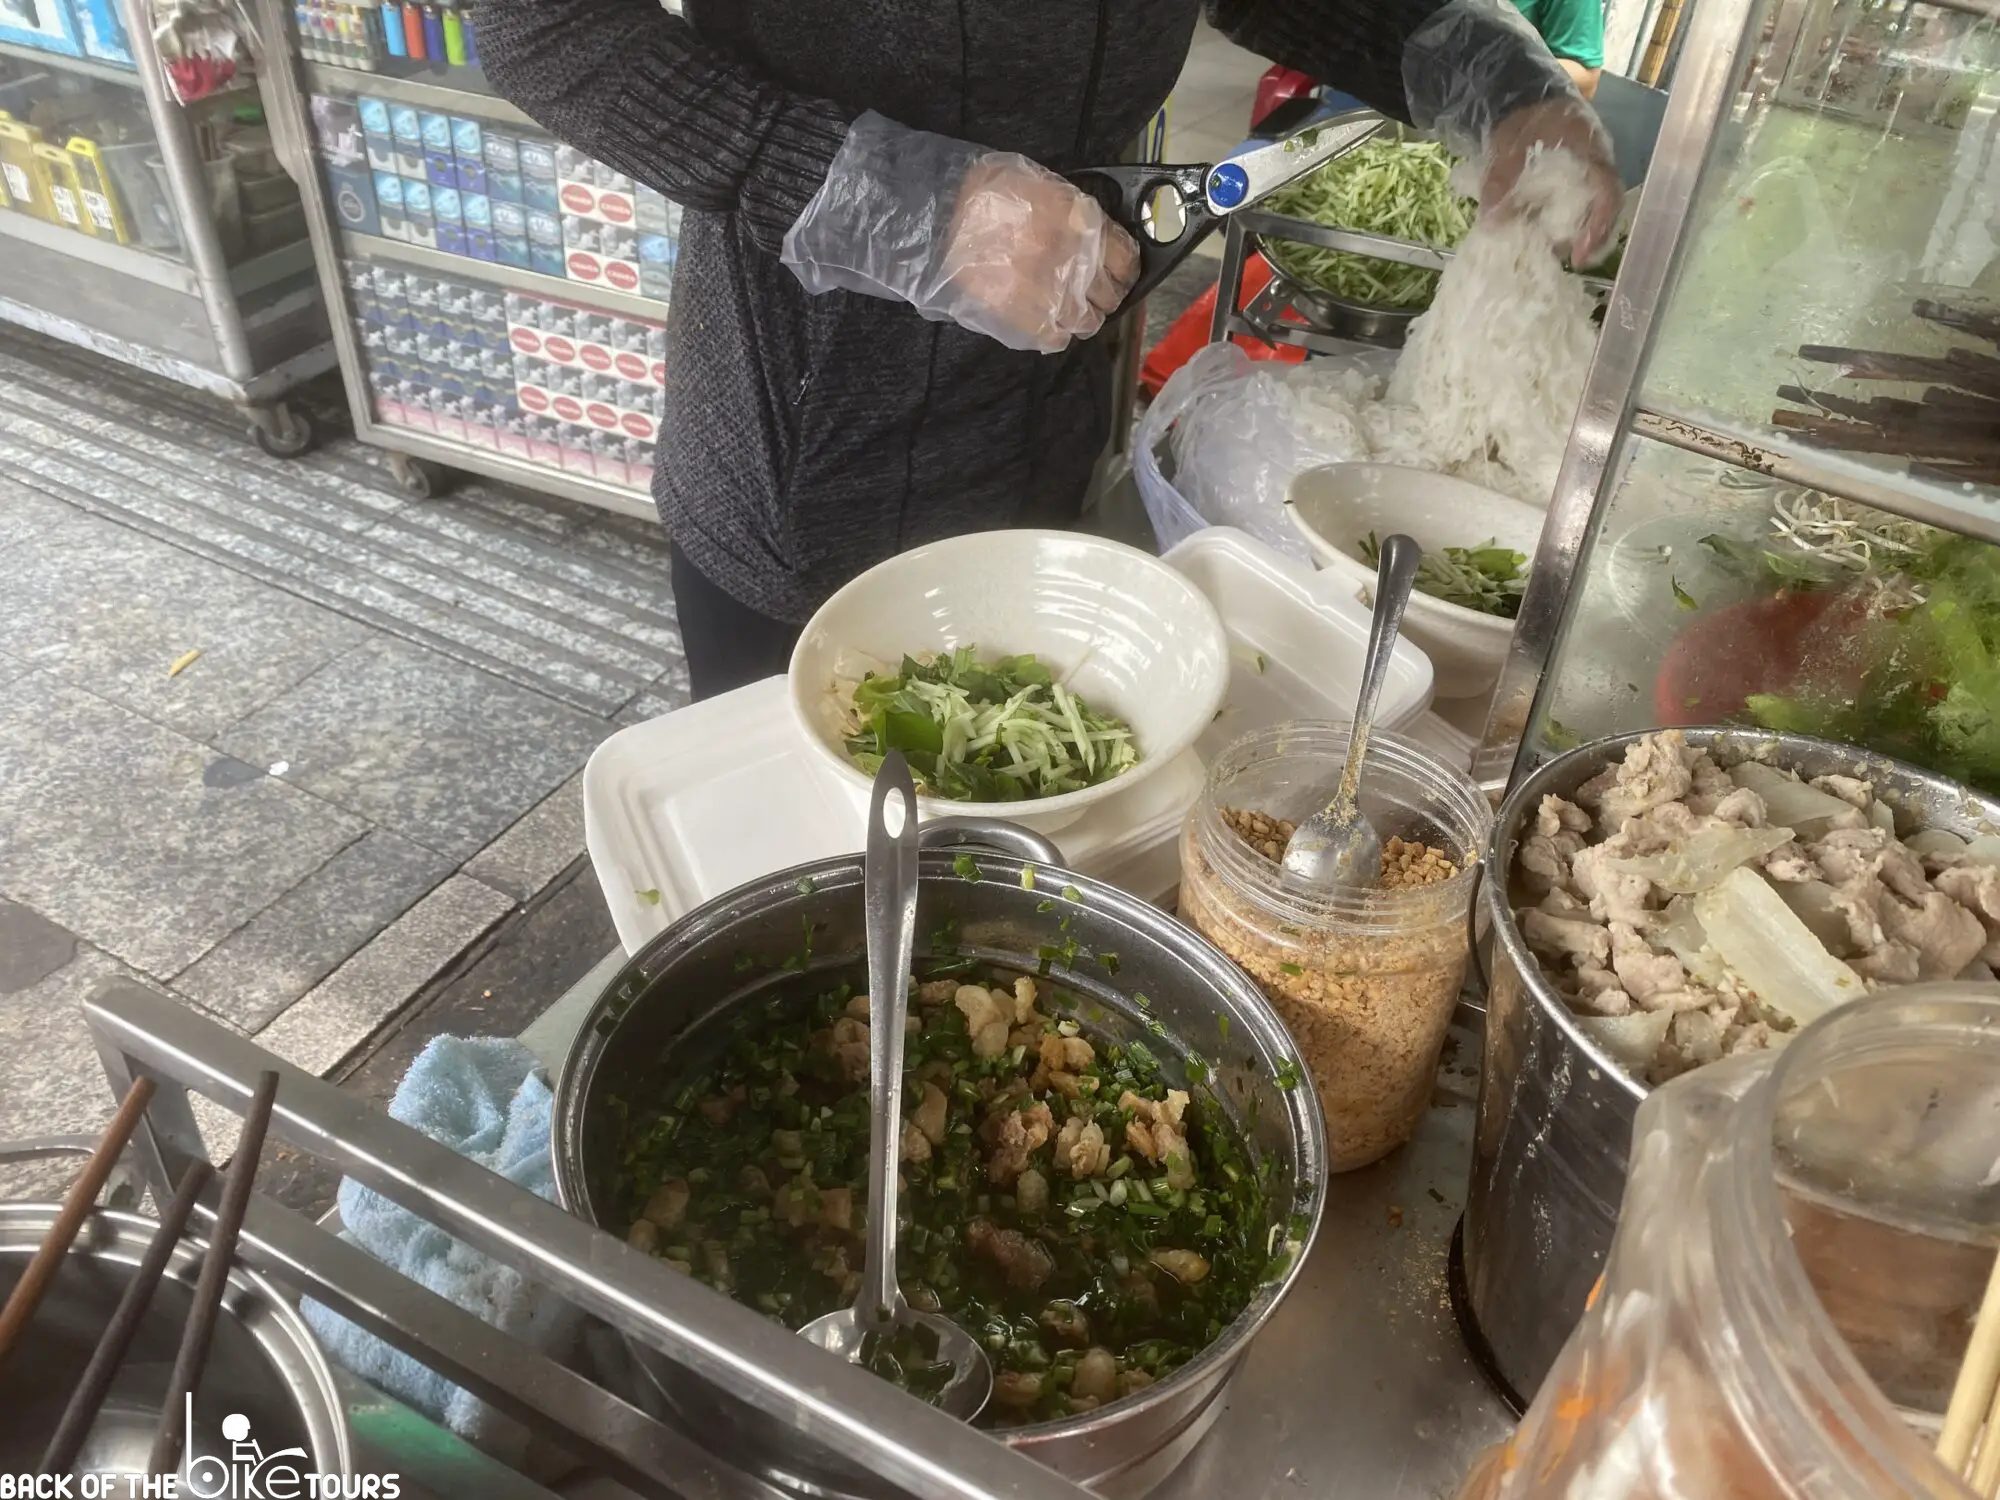 Is it safe to eat street food in ho chi minh City?